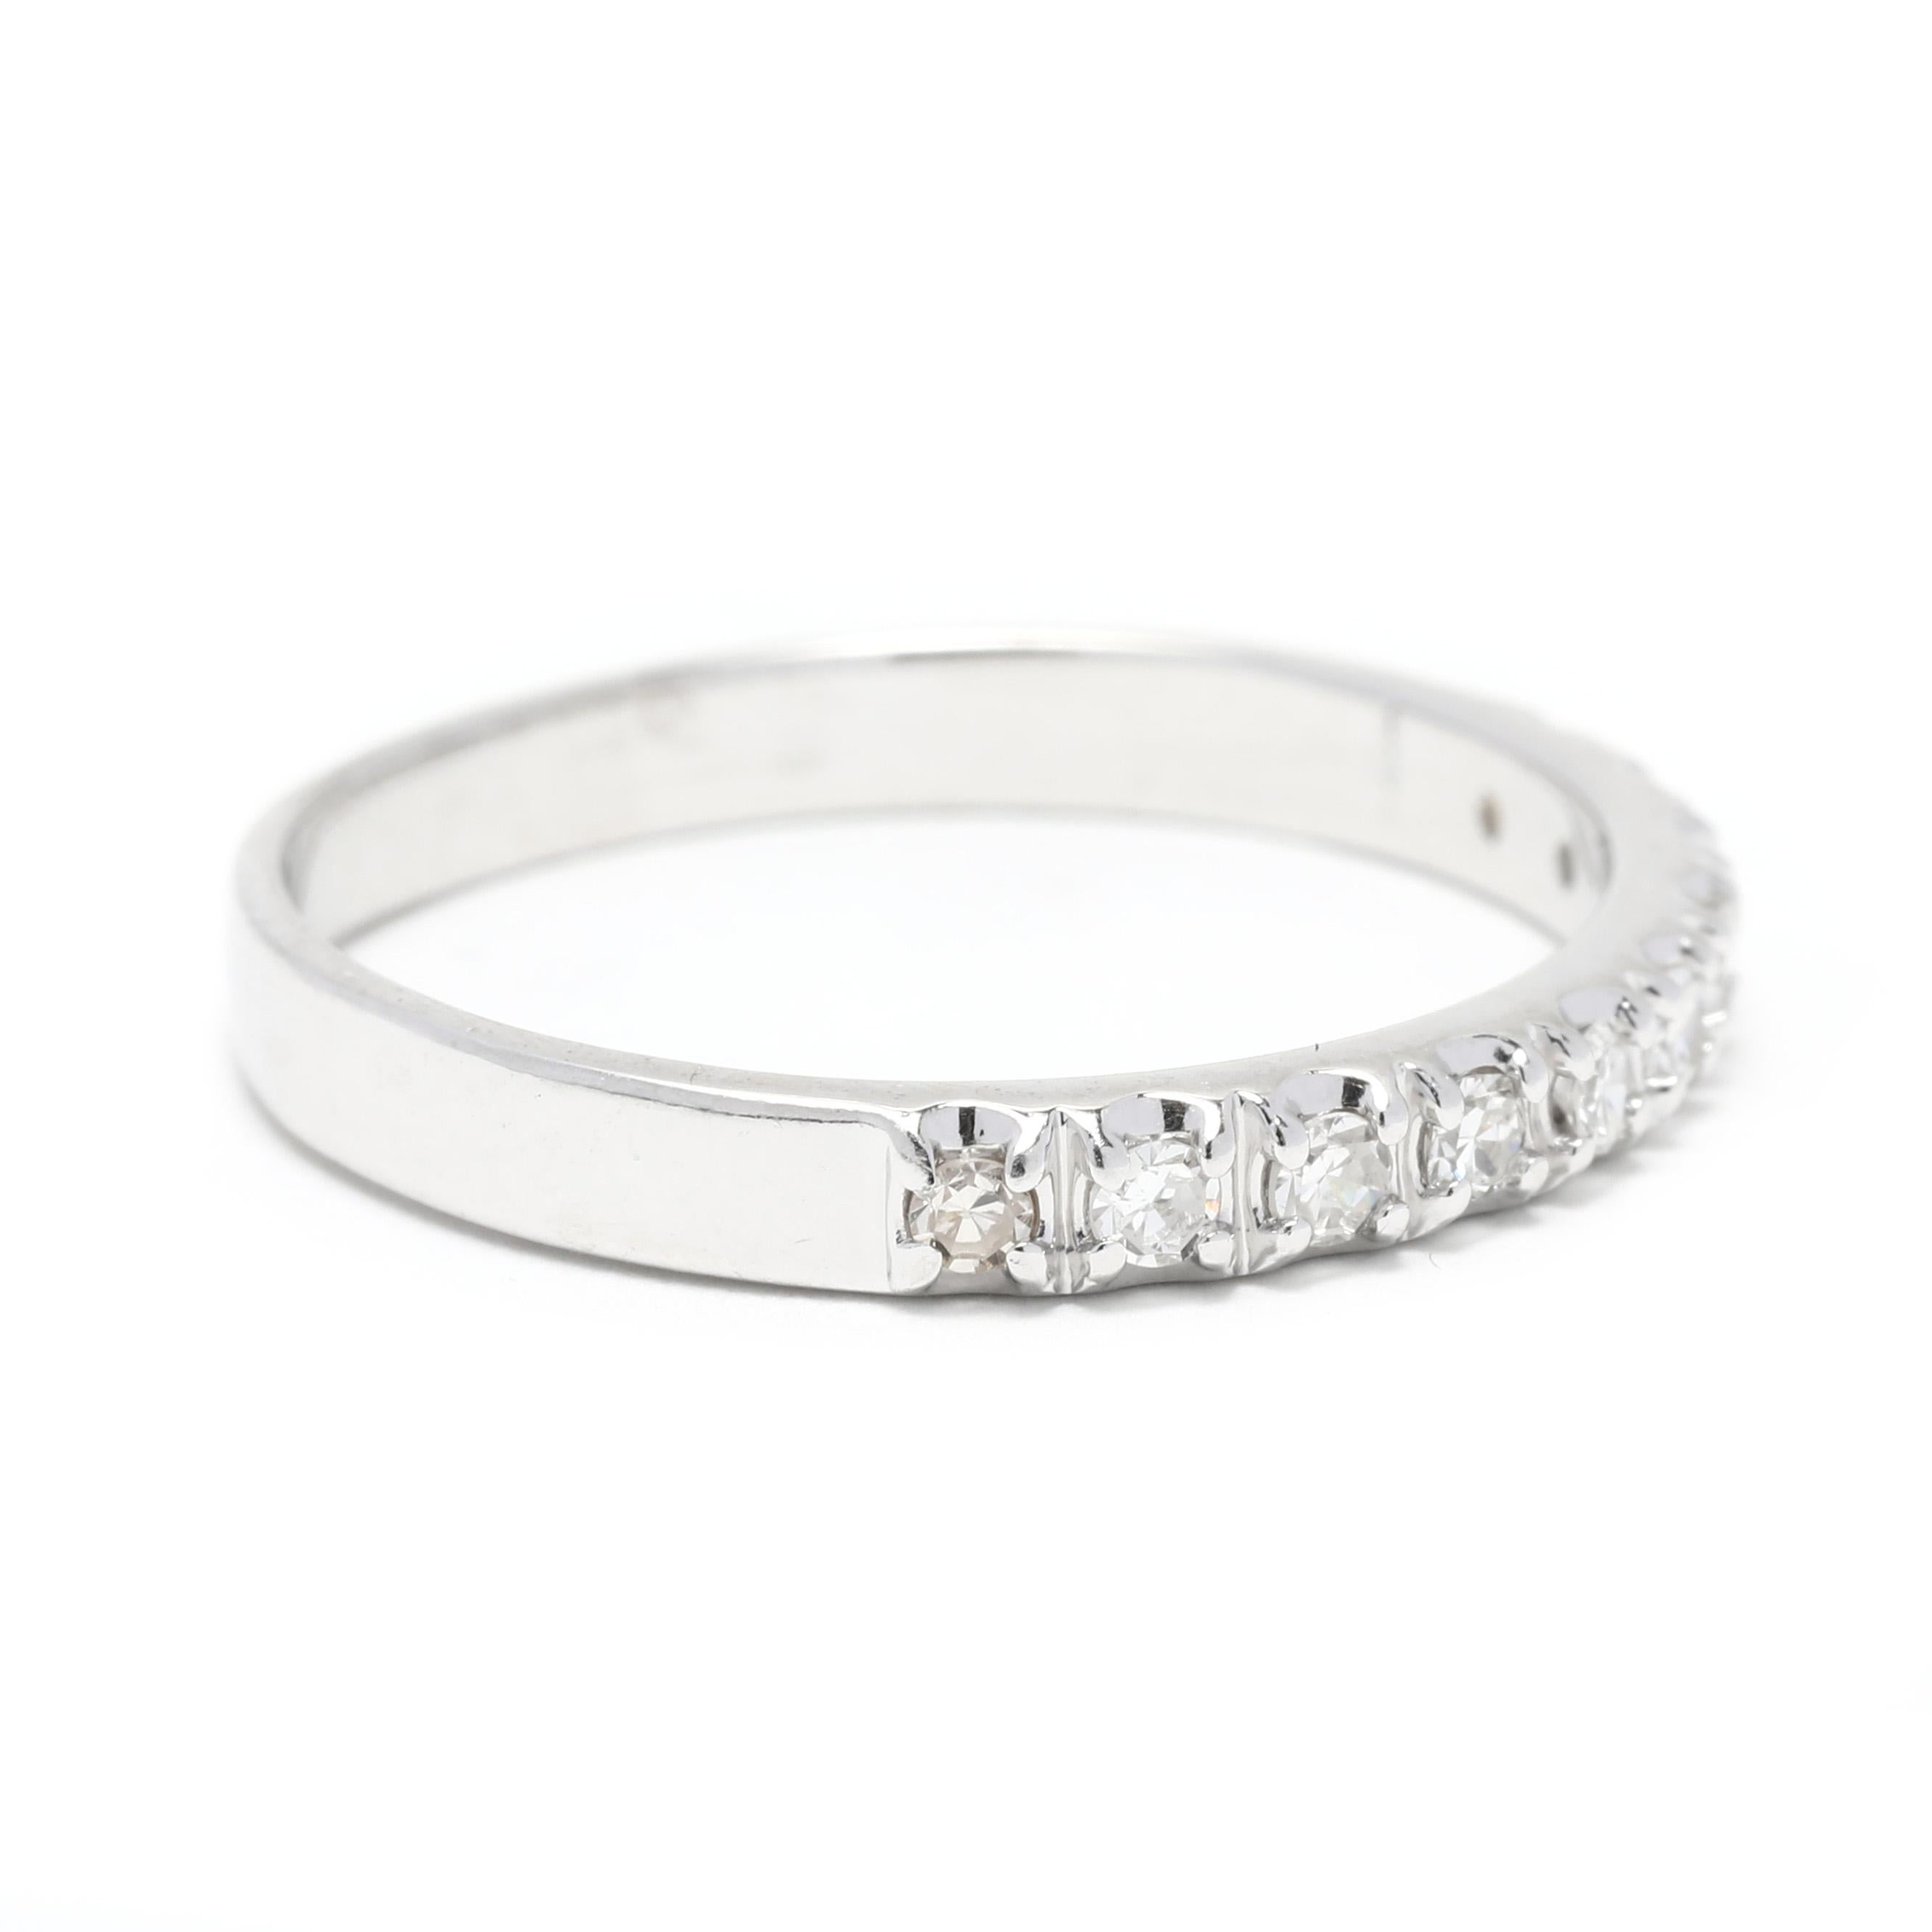 This elegant 0.15ctw diamond wedding band is the perfect way to add a touch of sparkle to your look. Made with 14K white gold, this timeless design features a row of French set diamonds for a traditional look. The thin band is stackable, making it